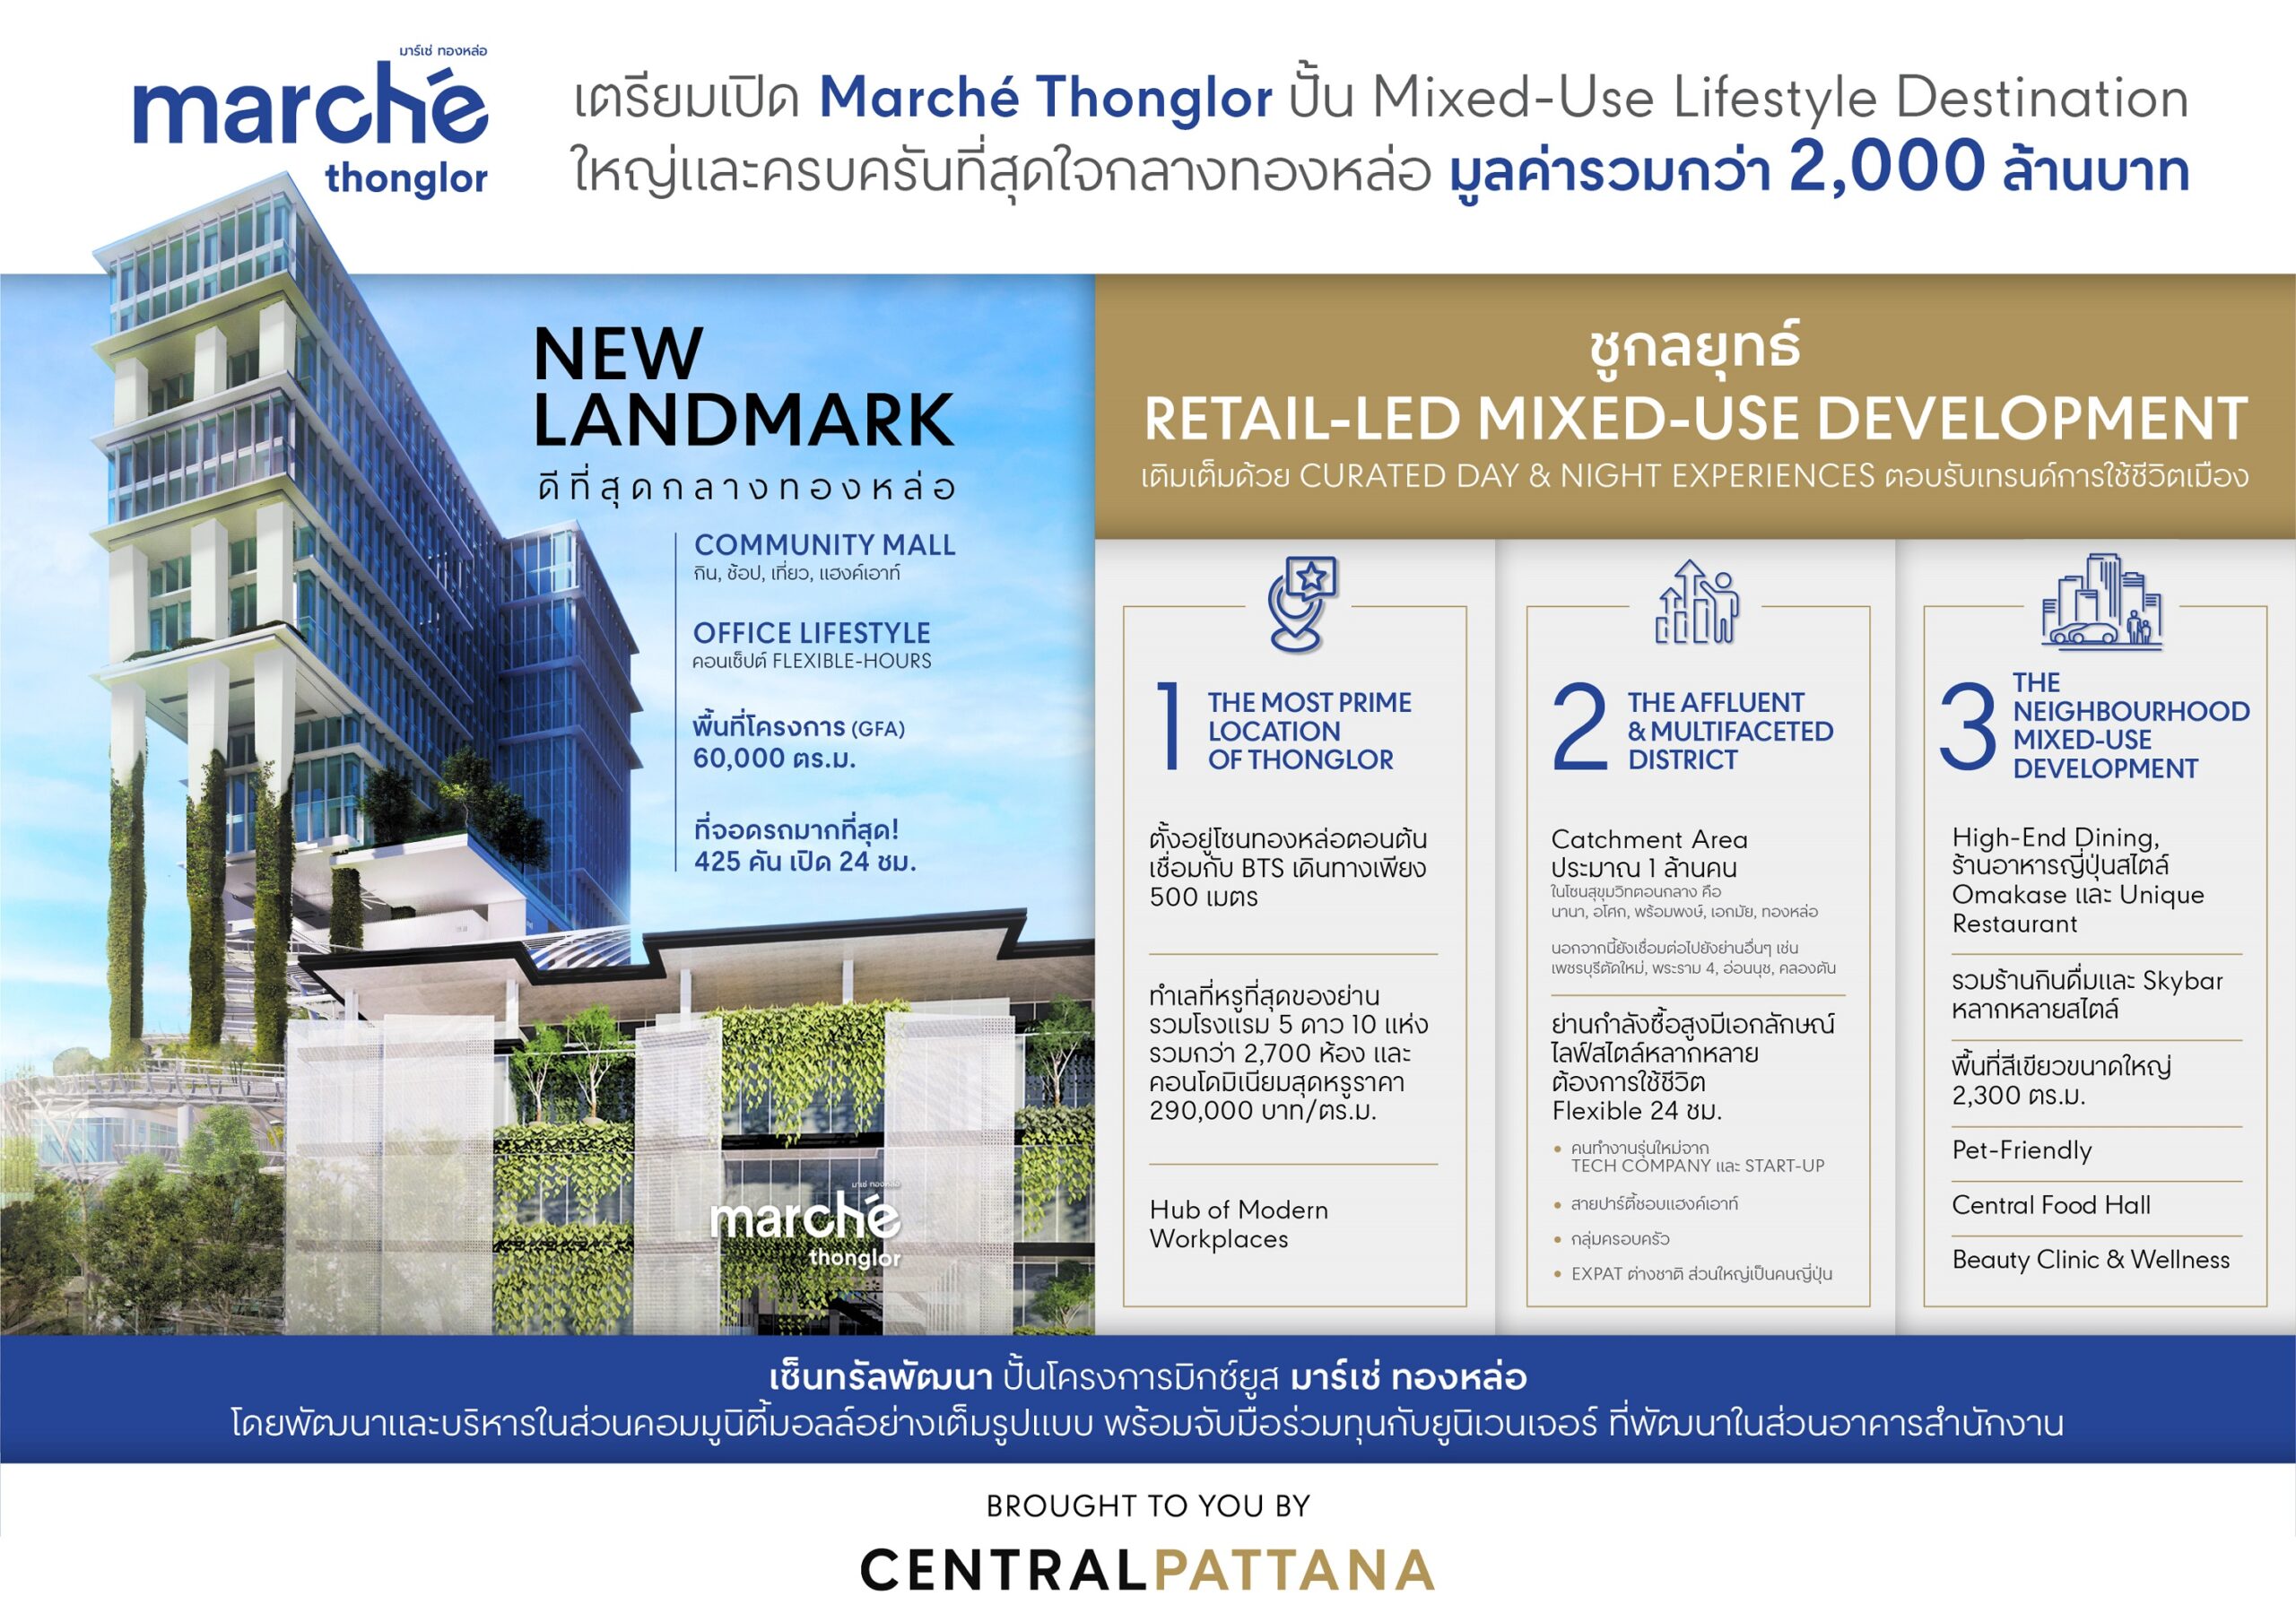 Marché Thonglor Mixed-Use Lifestyle Destination